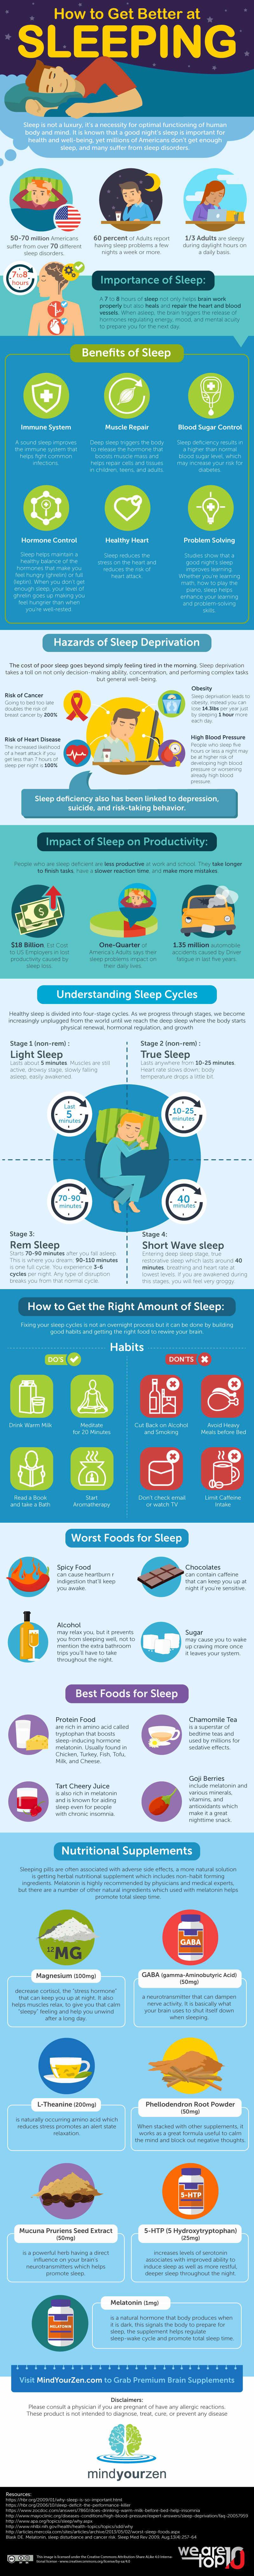 How to Get Better at Sleeping Infographic